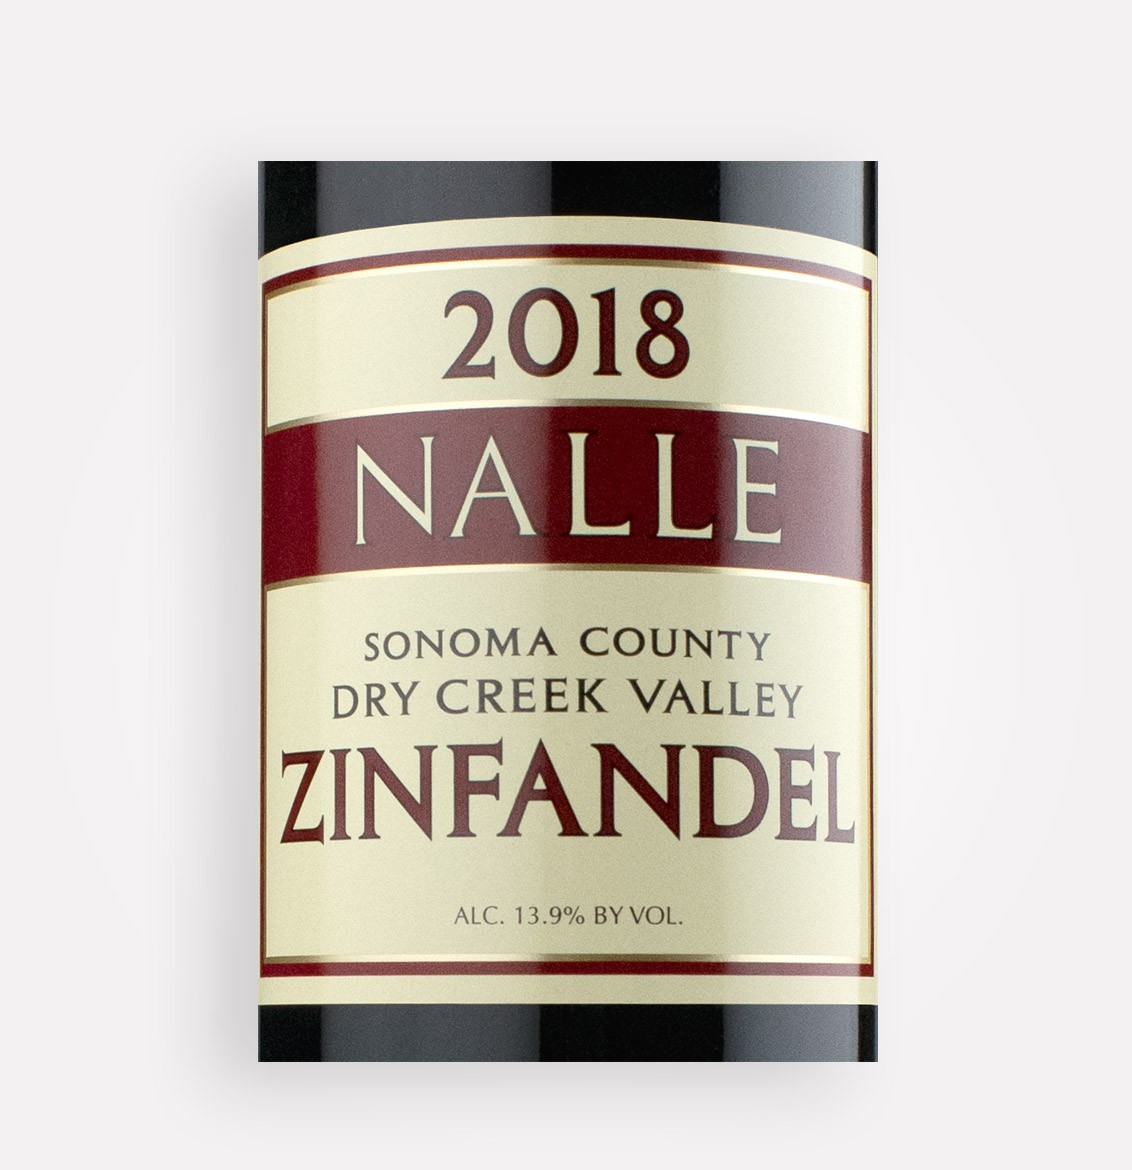 Front label close-up of Nalle Winery 2018 Dry Creek Valley Classic Zinfandel wine from California's Sonoma County